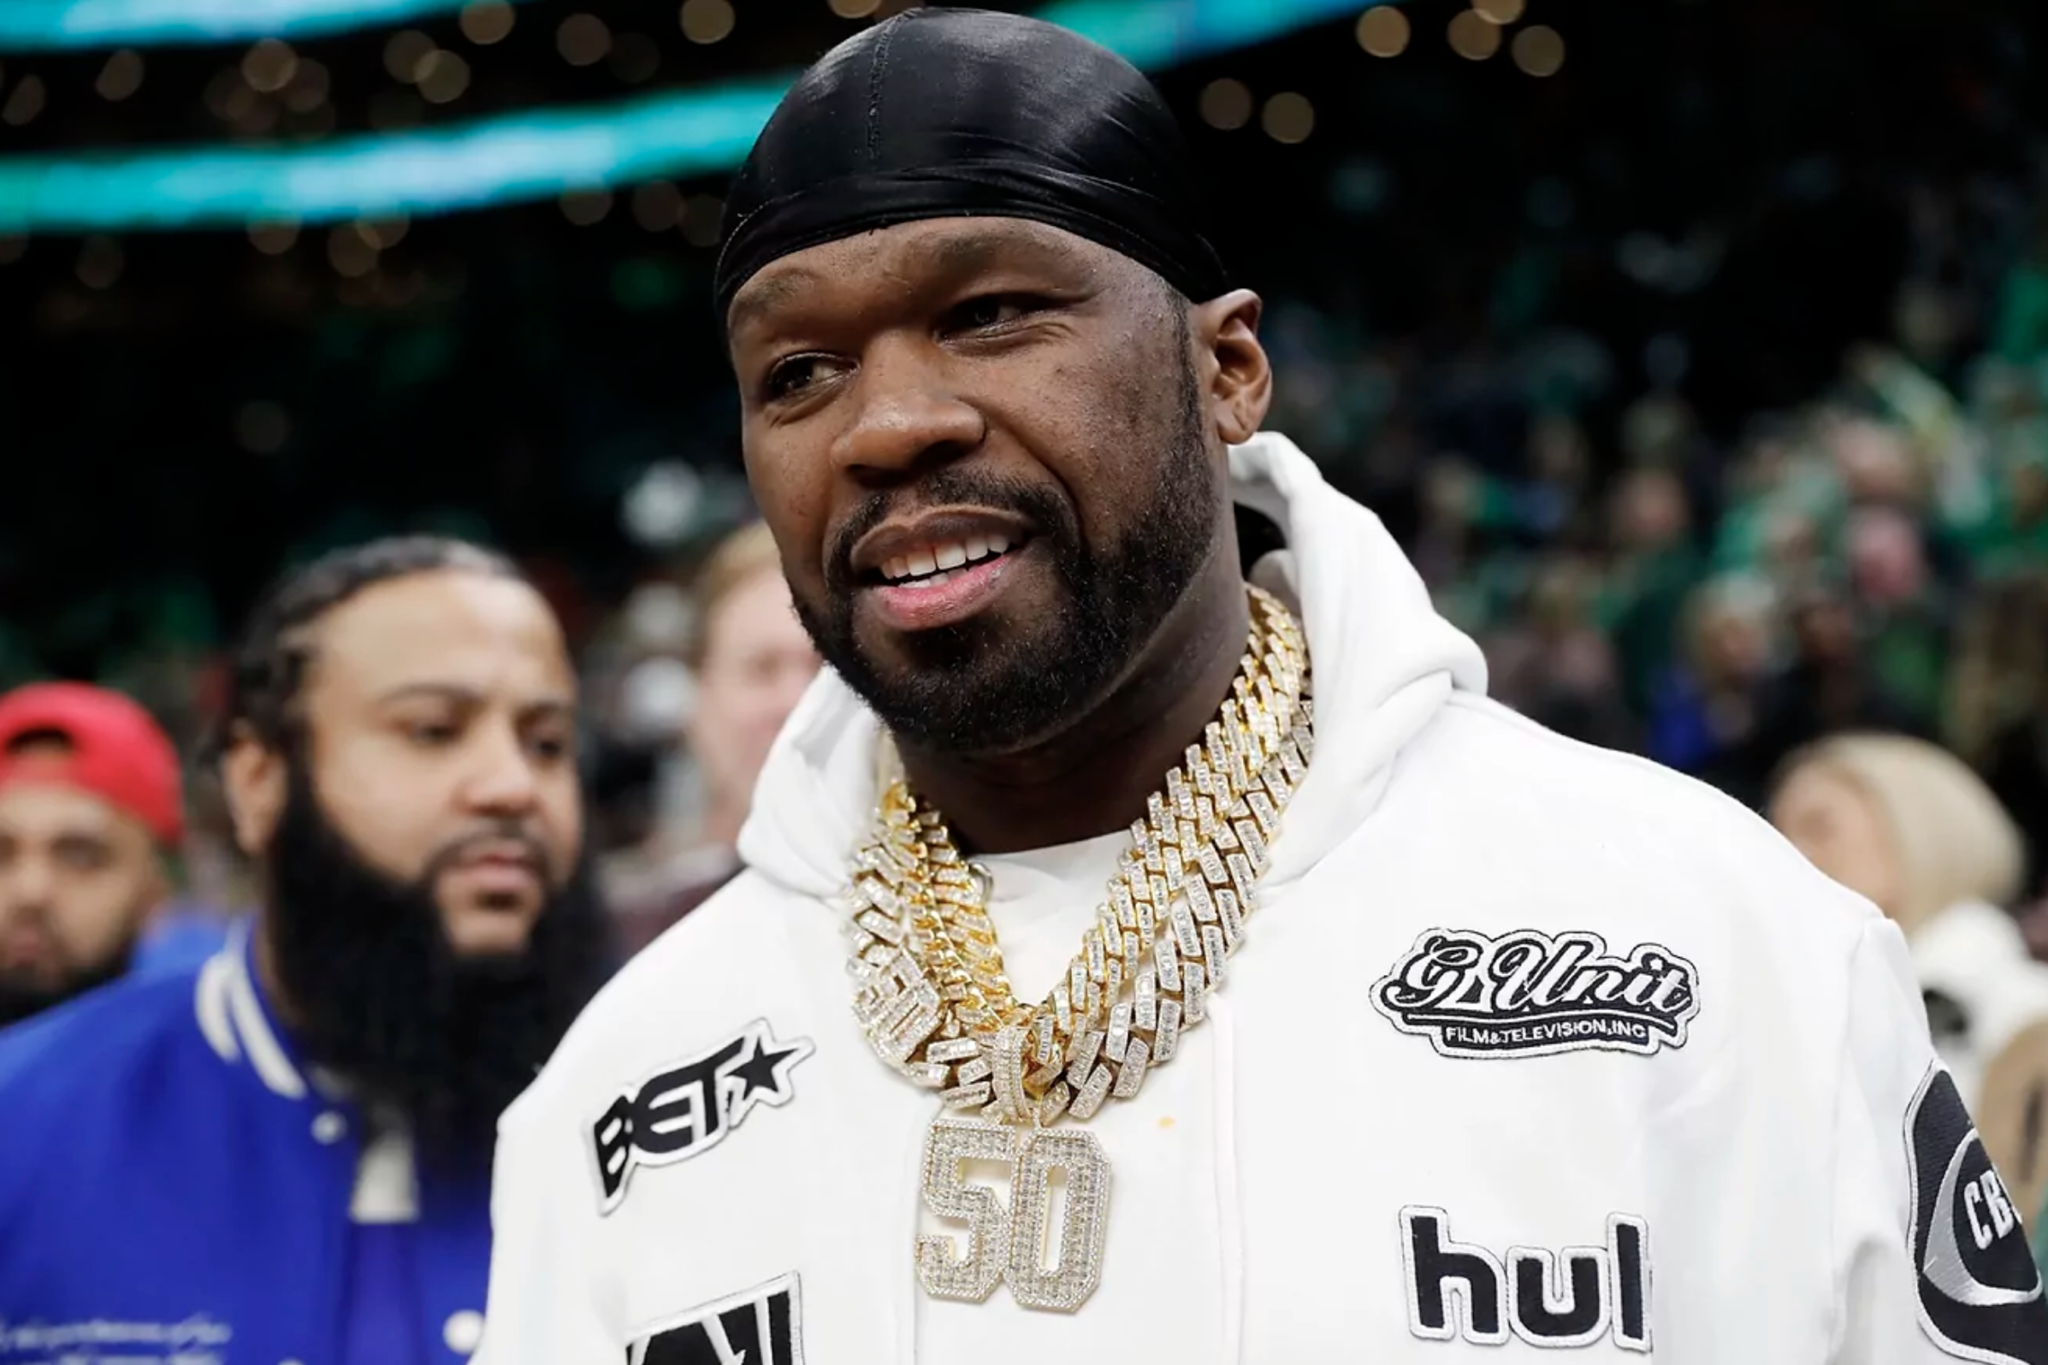 50 Cent criticizes NY mayor over proposal to give cash cards to immigrants